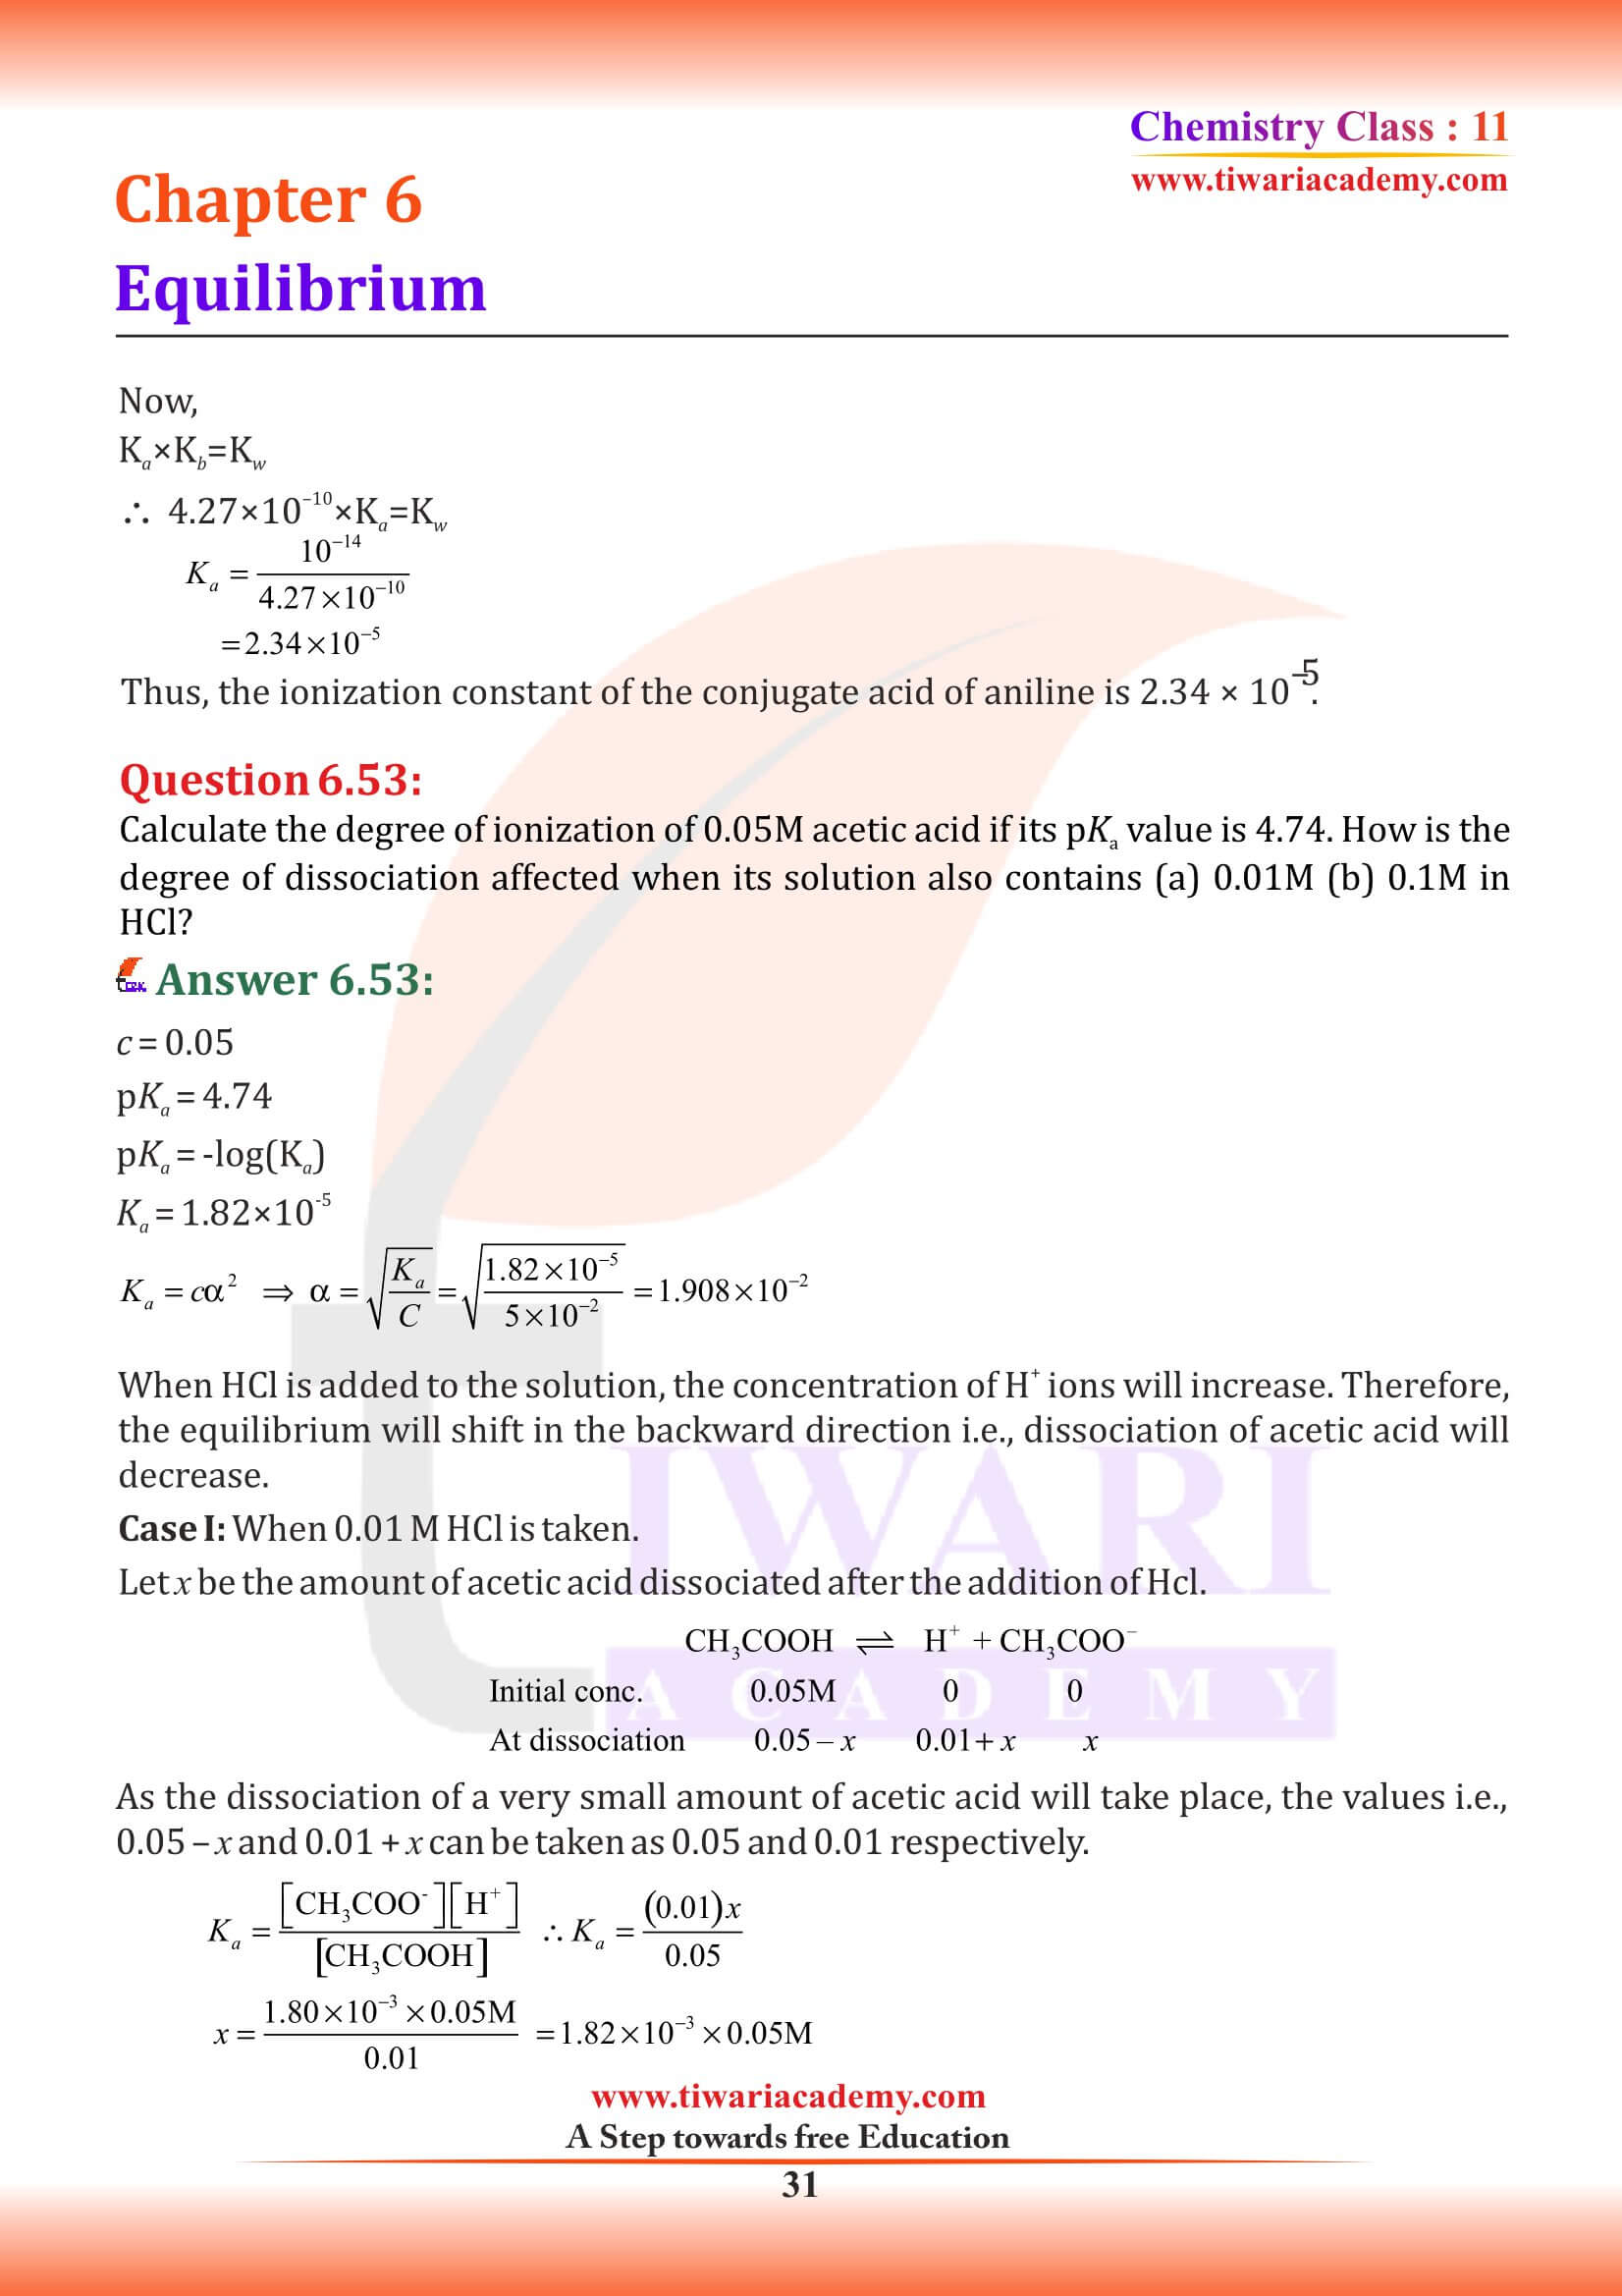 NCERT Class 11 Chemistry Chapter 6 Sols